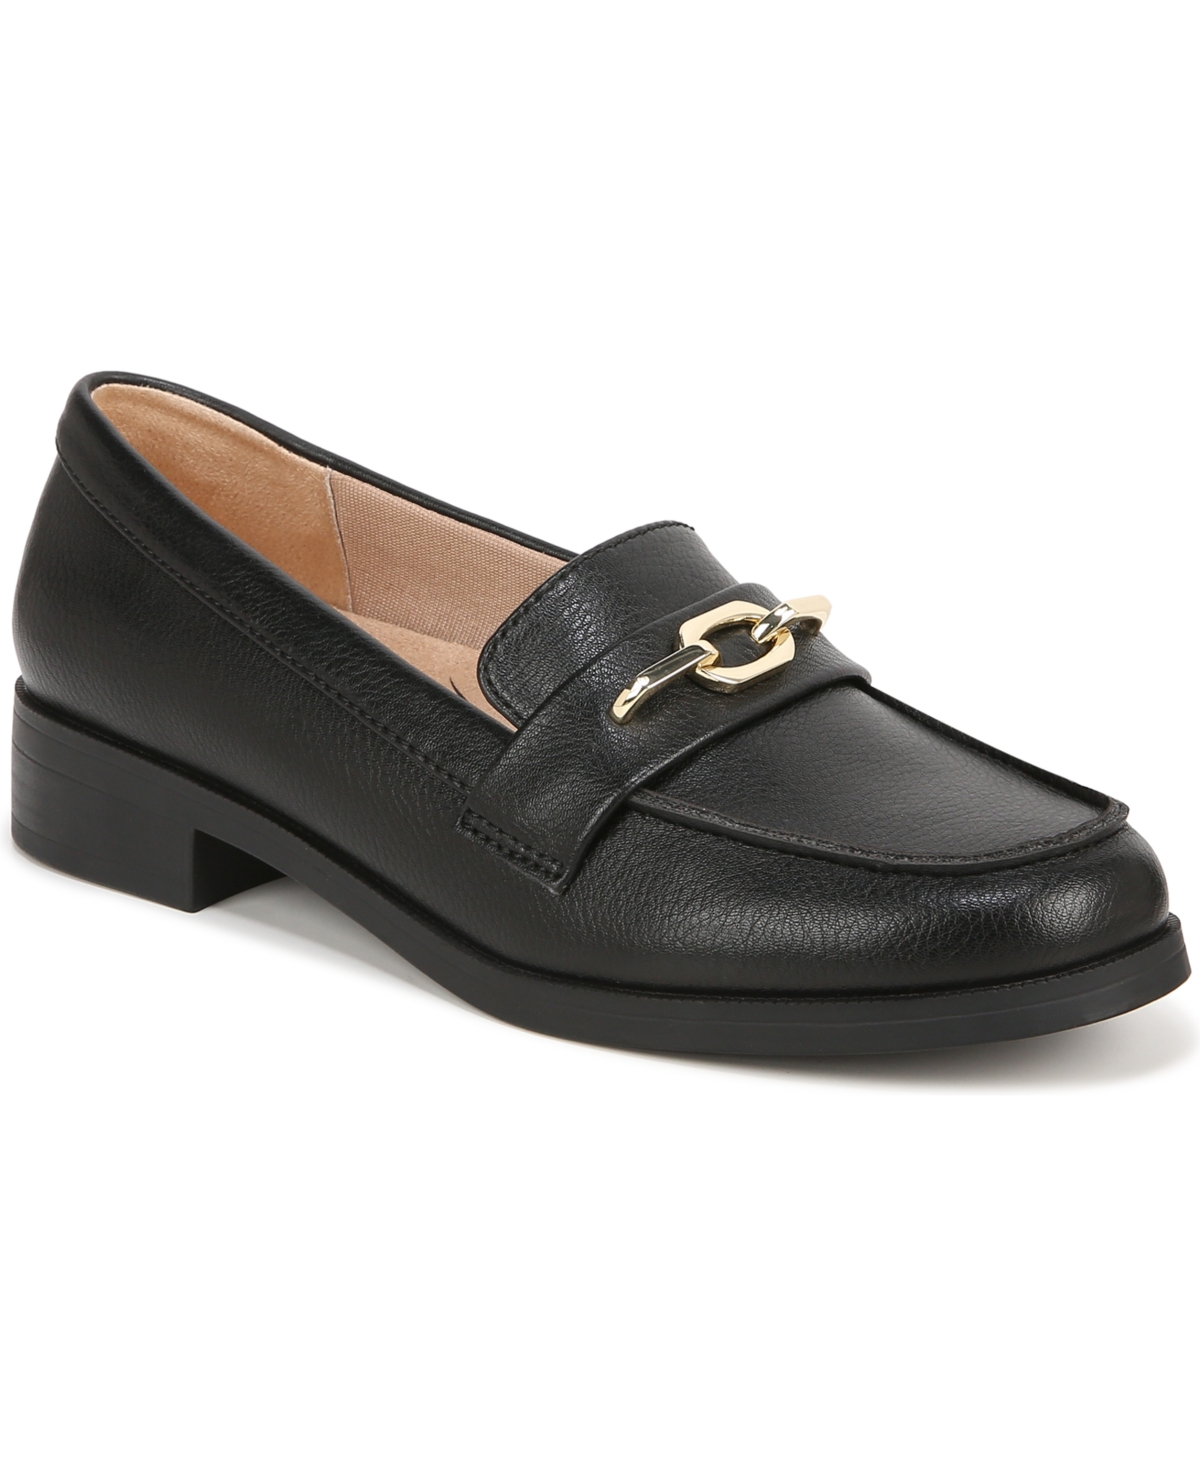 LifeStride Sonoma Loafers Women's Shoes